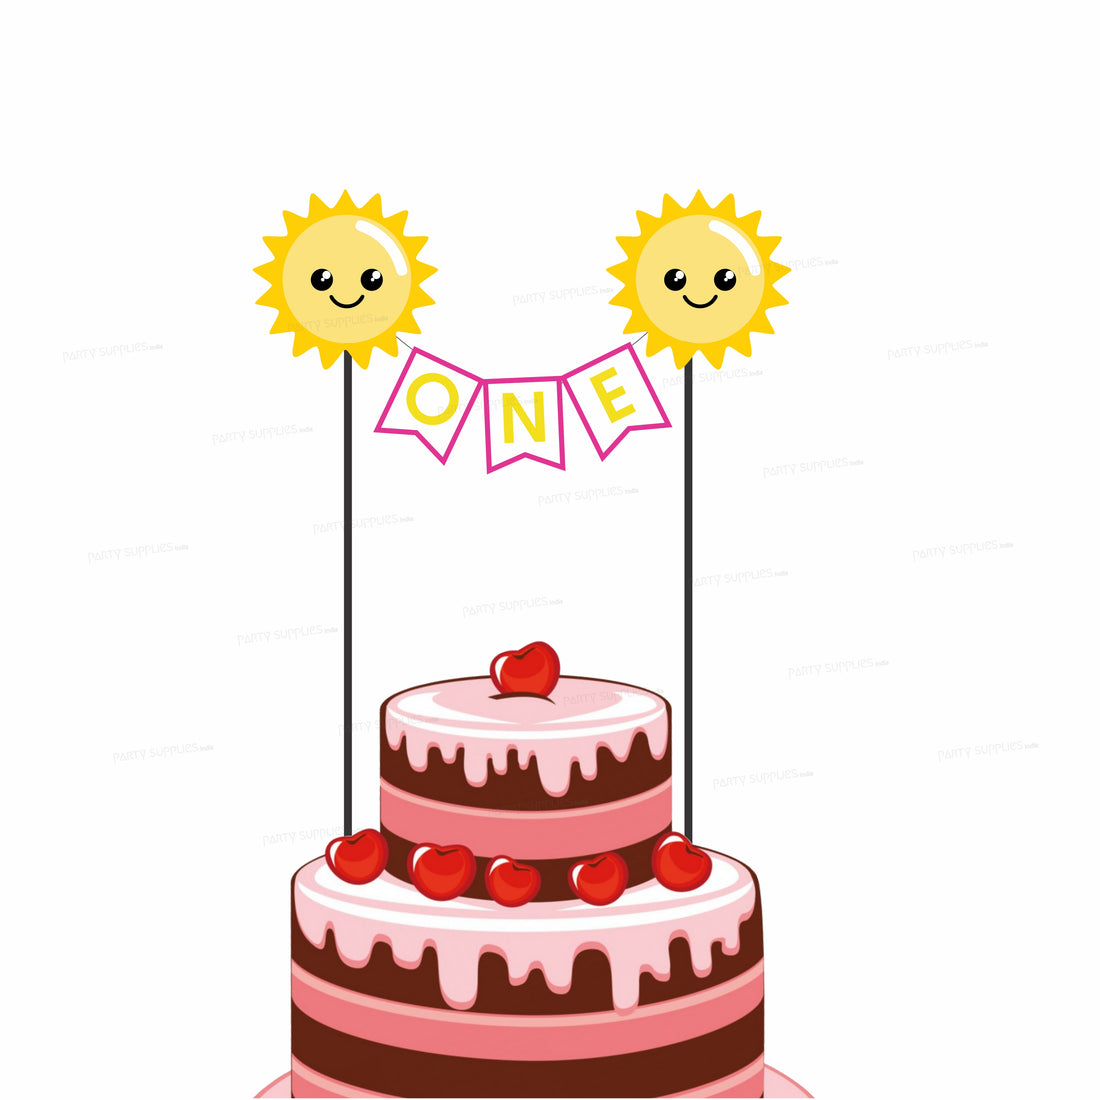 PSI Sunshine Theme Boy Personalized with Age Cake Topper